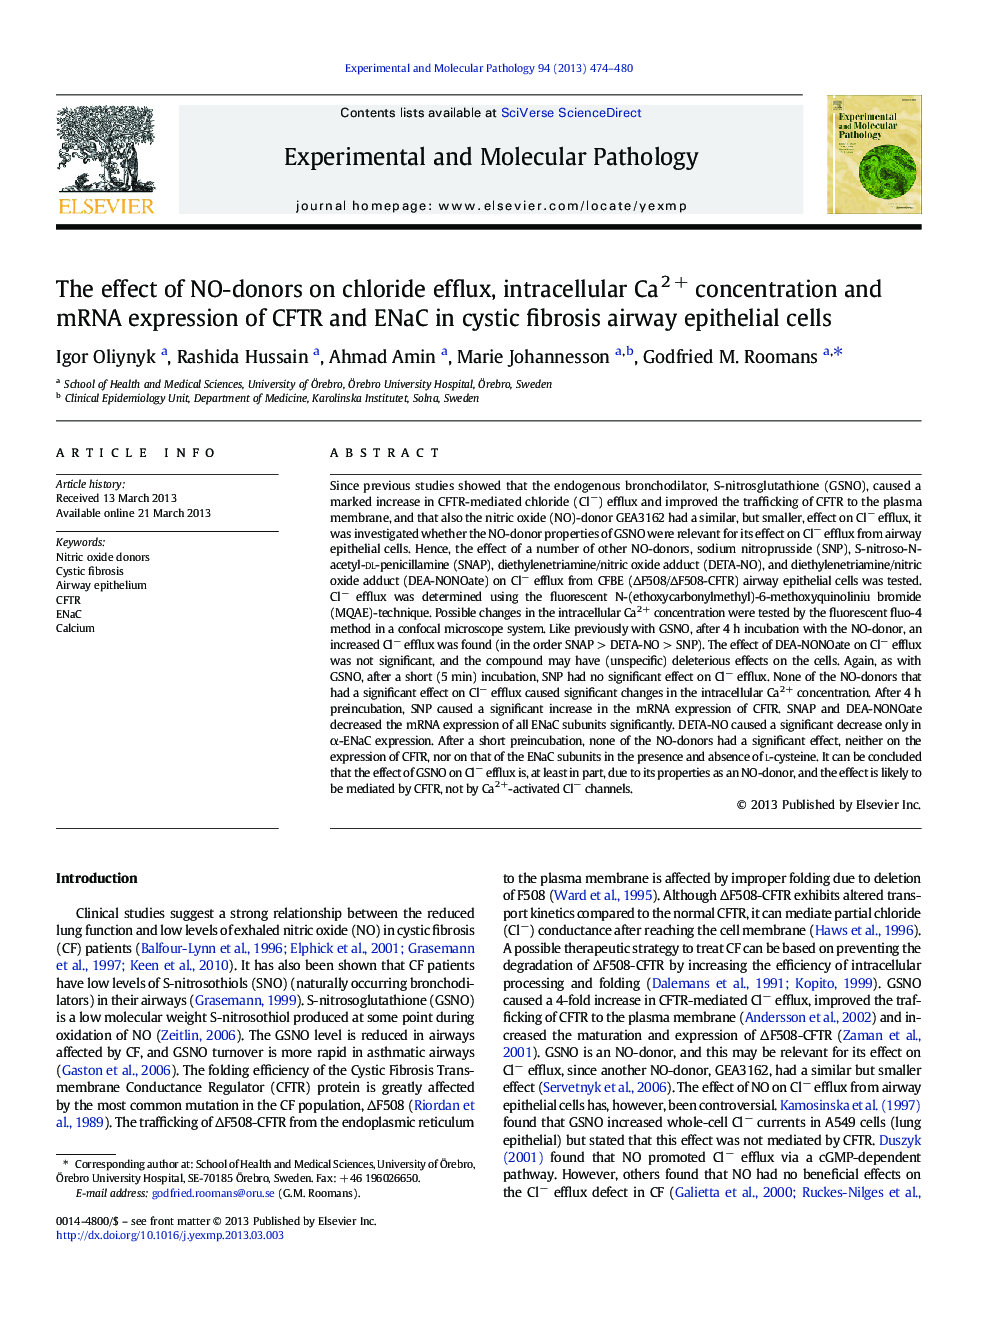 The effect of NO-donors on chloride efflux, intracellular Ca2 + concentration and mRNA expression of CFTR and ENaC in cystic fibrosis airway epithelial cells